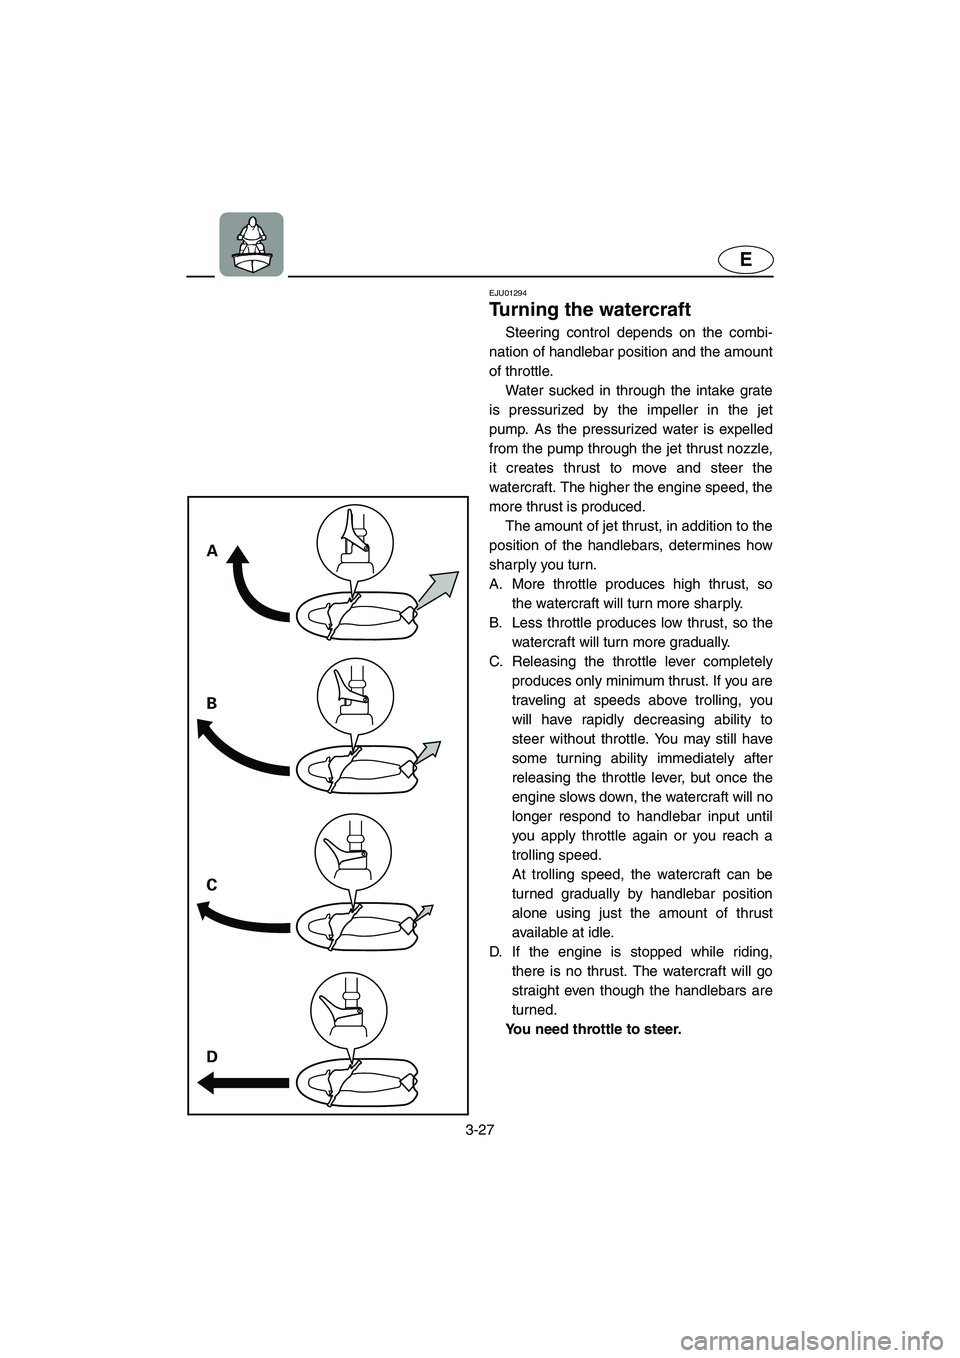 YAMAHA SUPERJET 2002  Owners Manual 3-27
E
A
B
C
D
EJU01294 
Turning the watercraft  
Steering control depends on the combi-
nation of handlebar position and the amount
of throttle. 
Water sucked in through the intake grate
is pressuriz